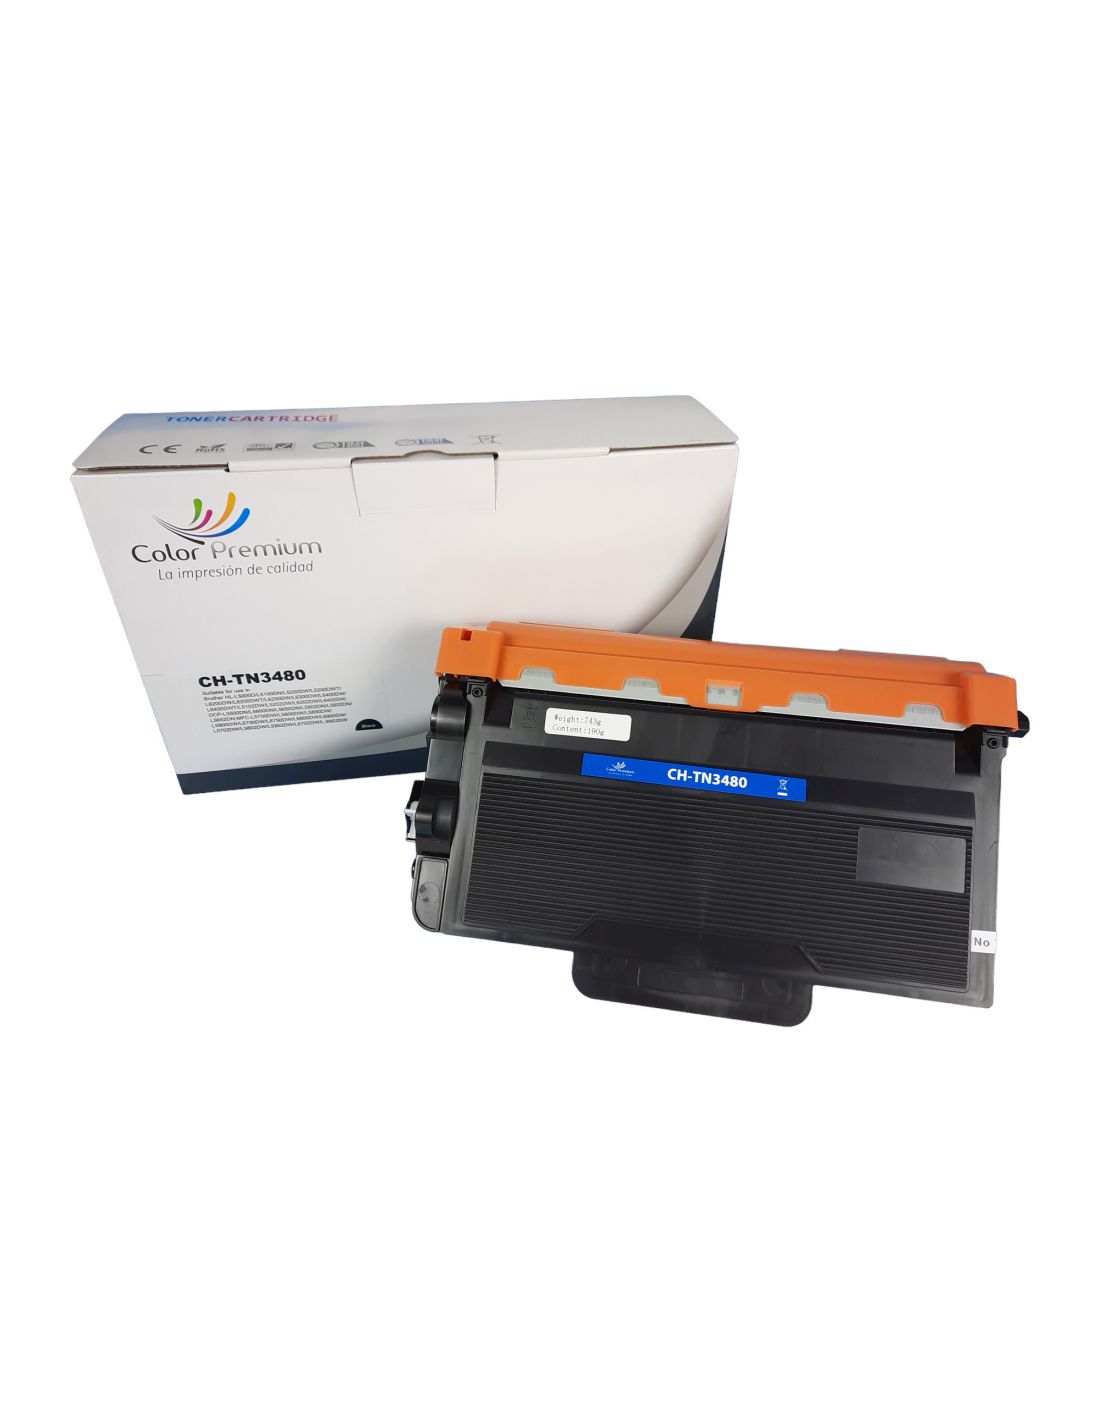 Everyday™ Mono Toner by Xerox compatible with Brother TN-3480